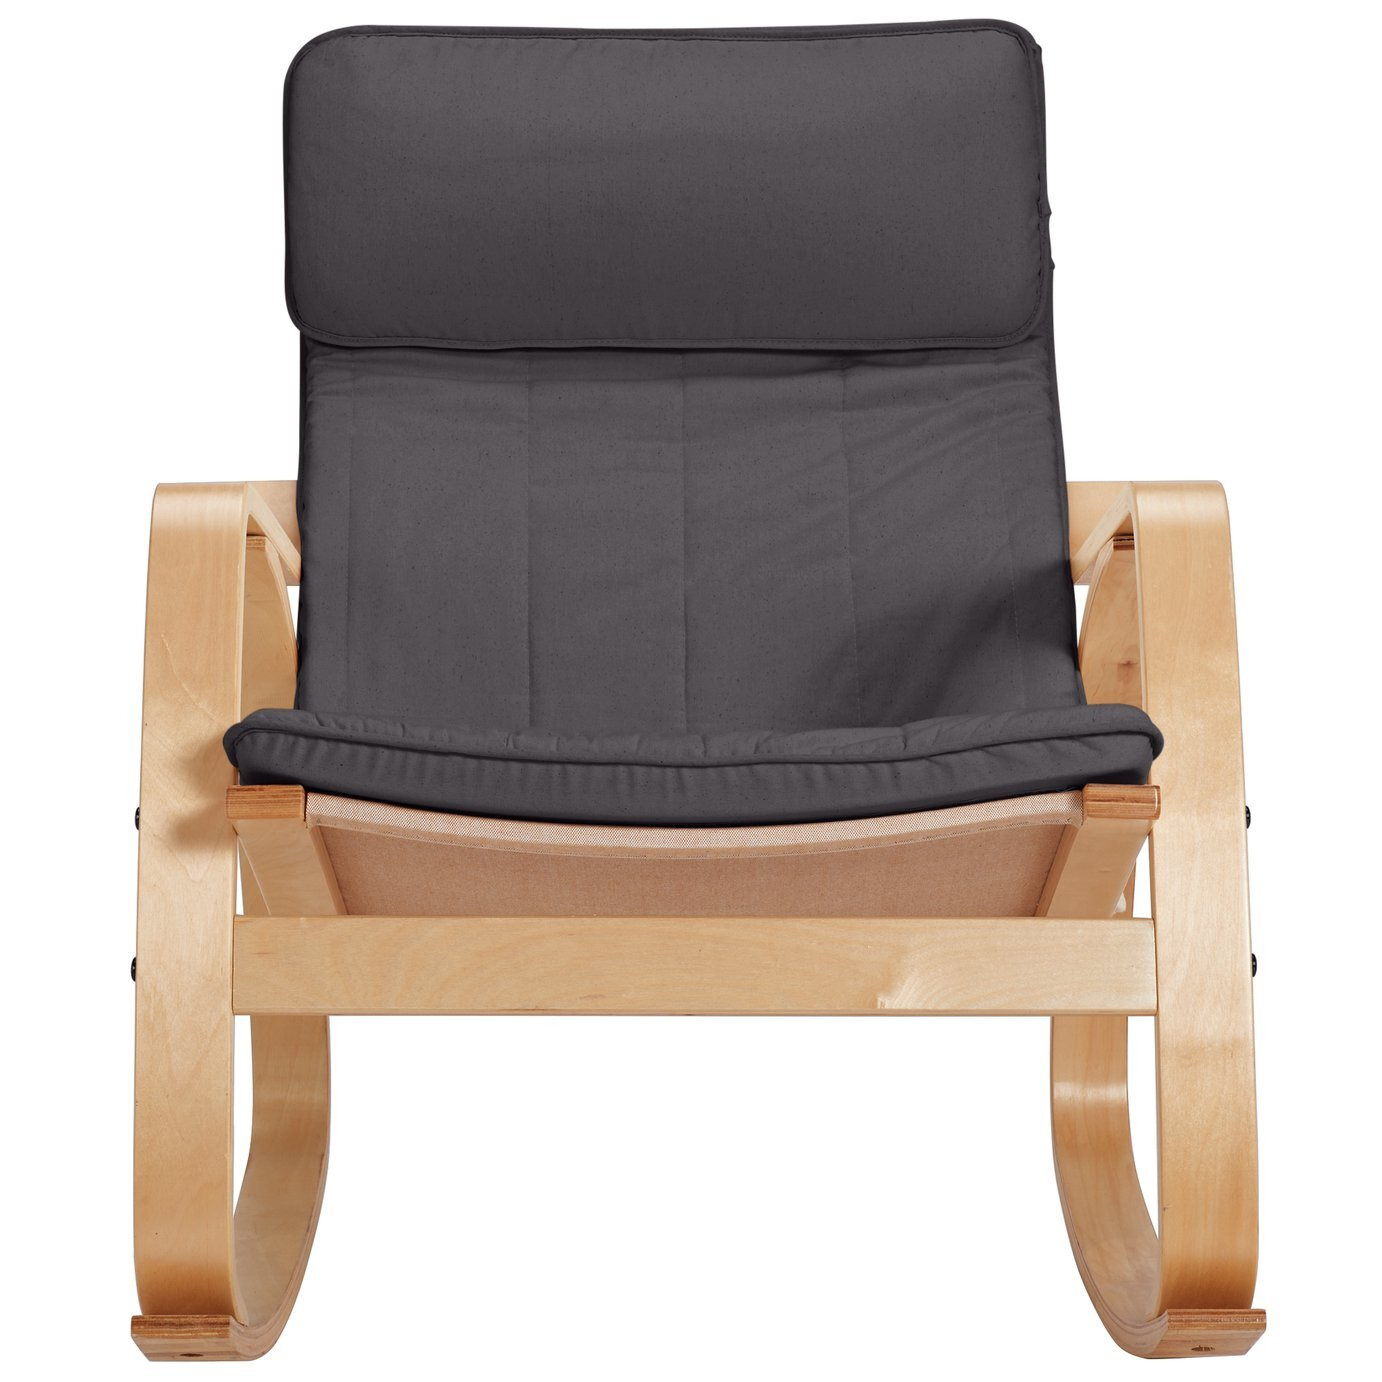 Argos Home Fabric Rocking Chair - Charcoal - image 1